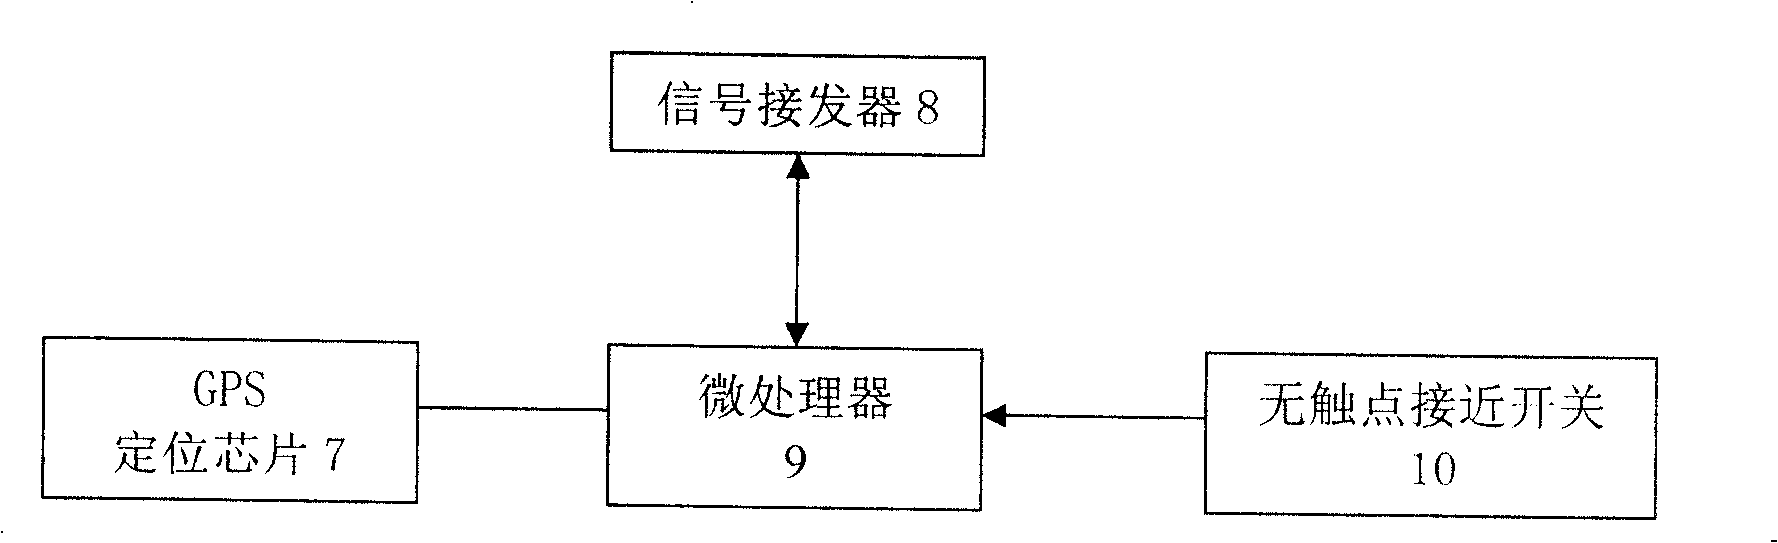 Electronic label for container with electronic seal, and capable of positioning container